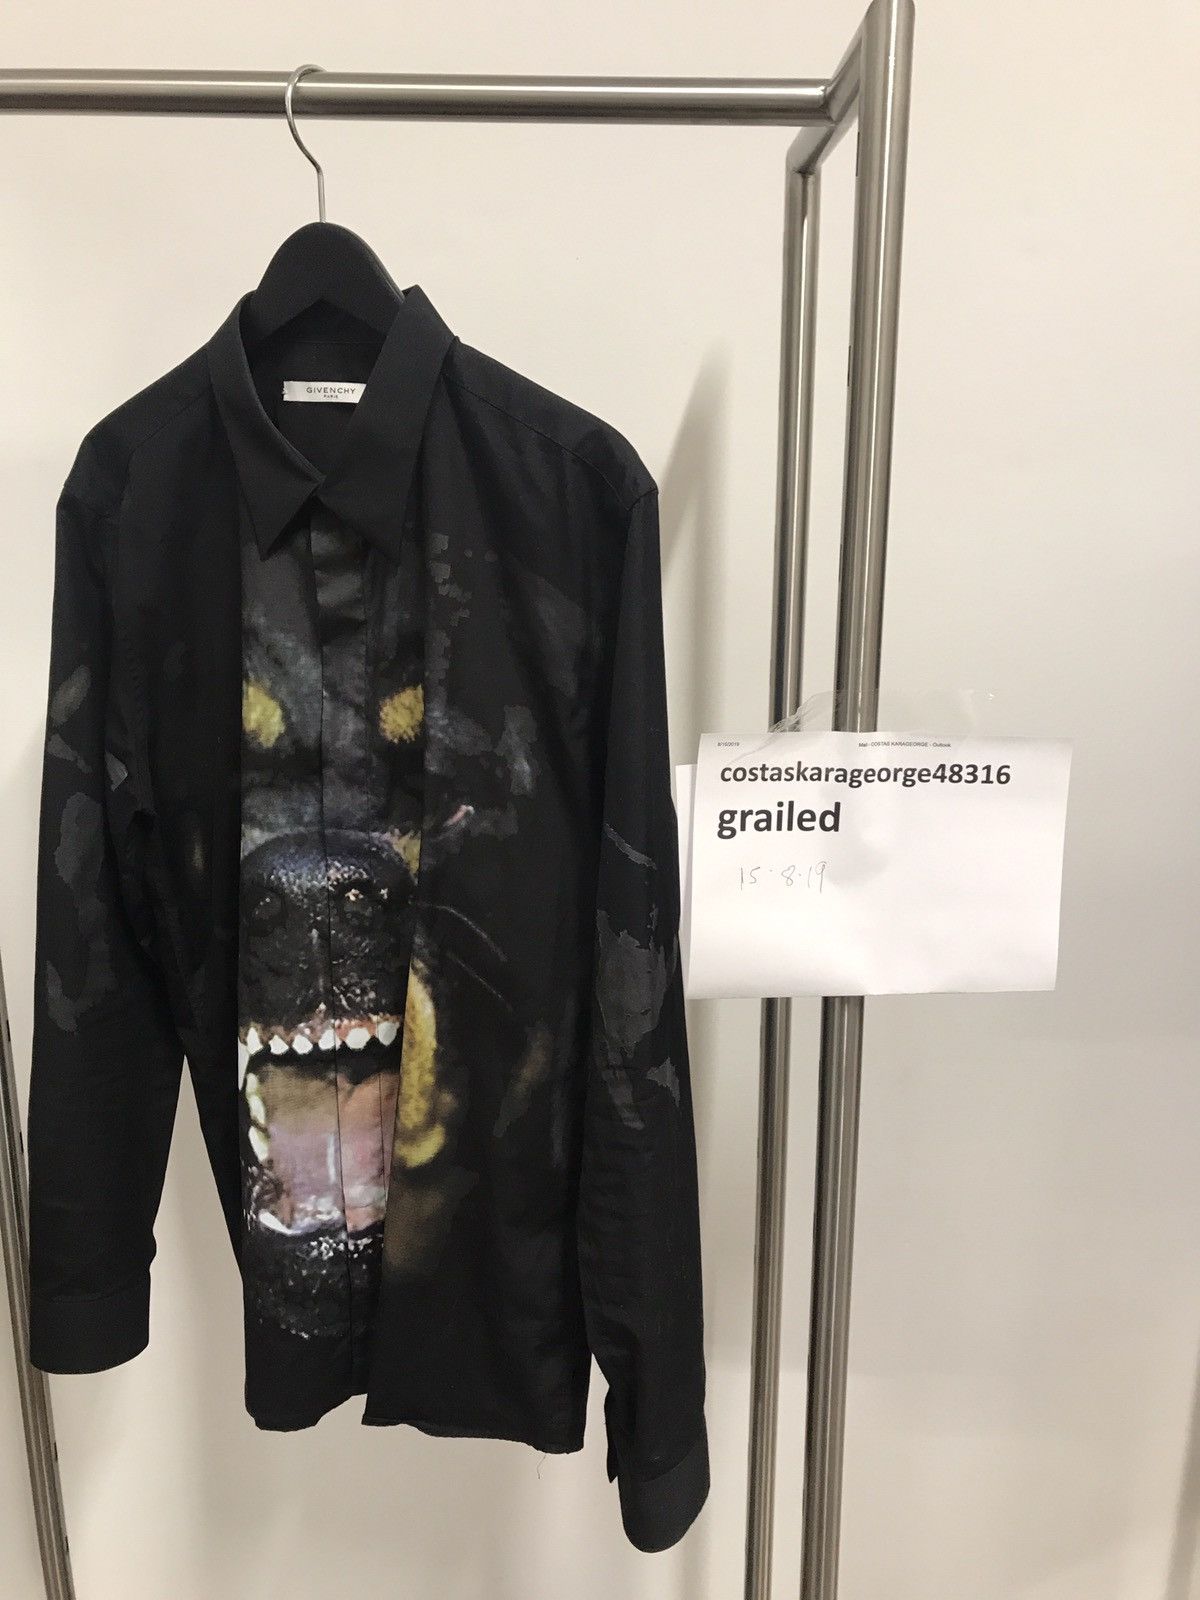 Givenchy Givenchy shirt Rottweiler 43 dog Size US XL / EU 56 / 4 - 4 Preview